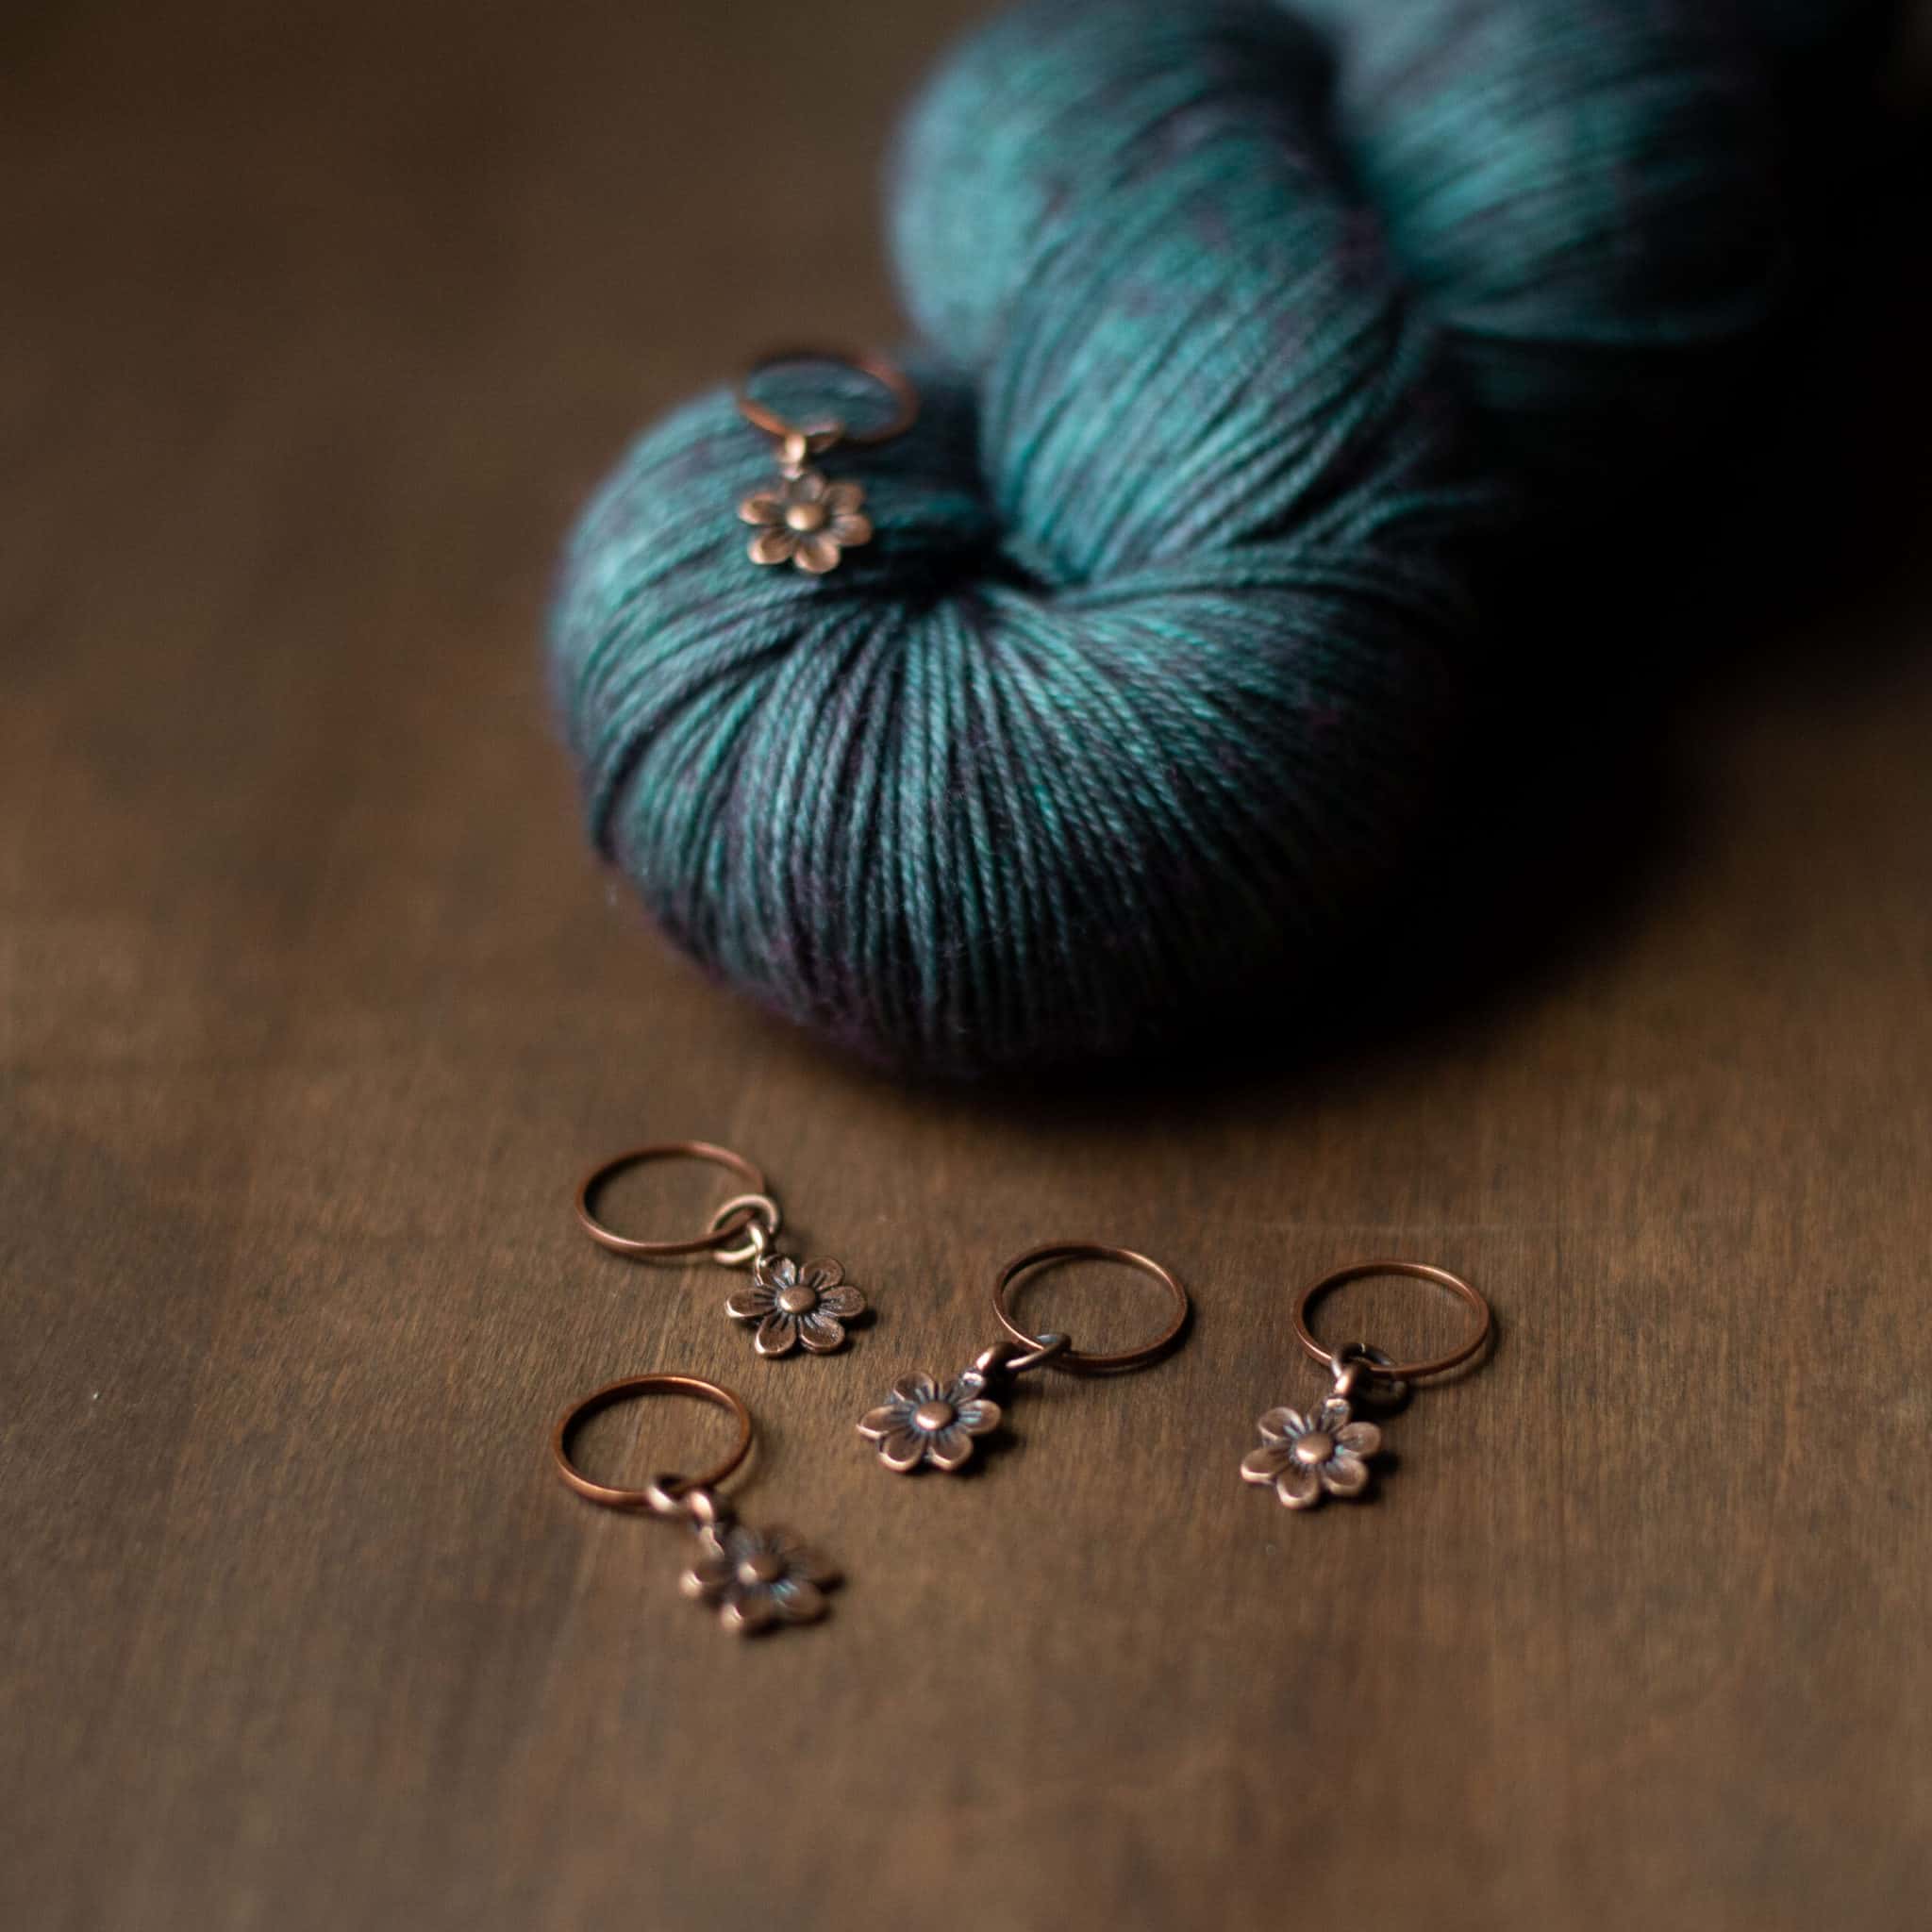 Copper daisy stitch markers on a skein of teal yarn.